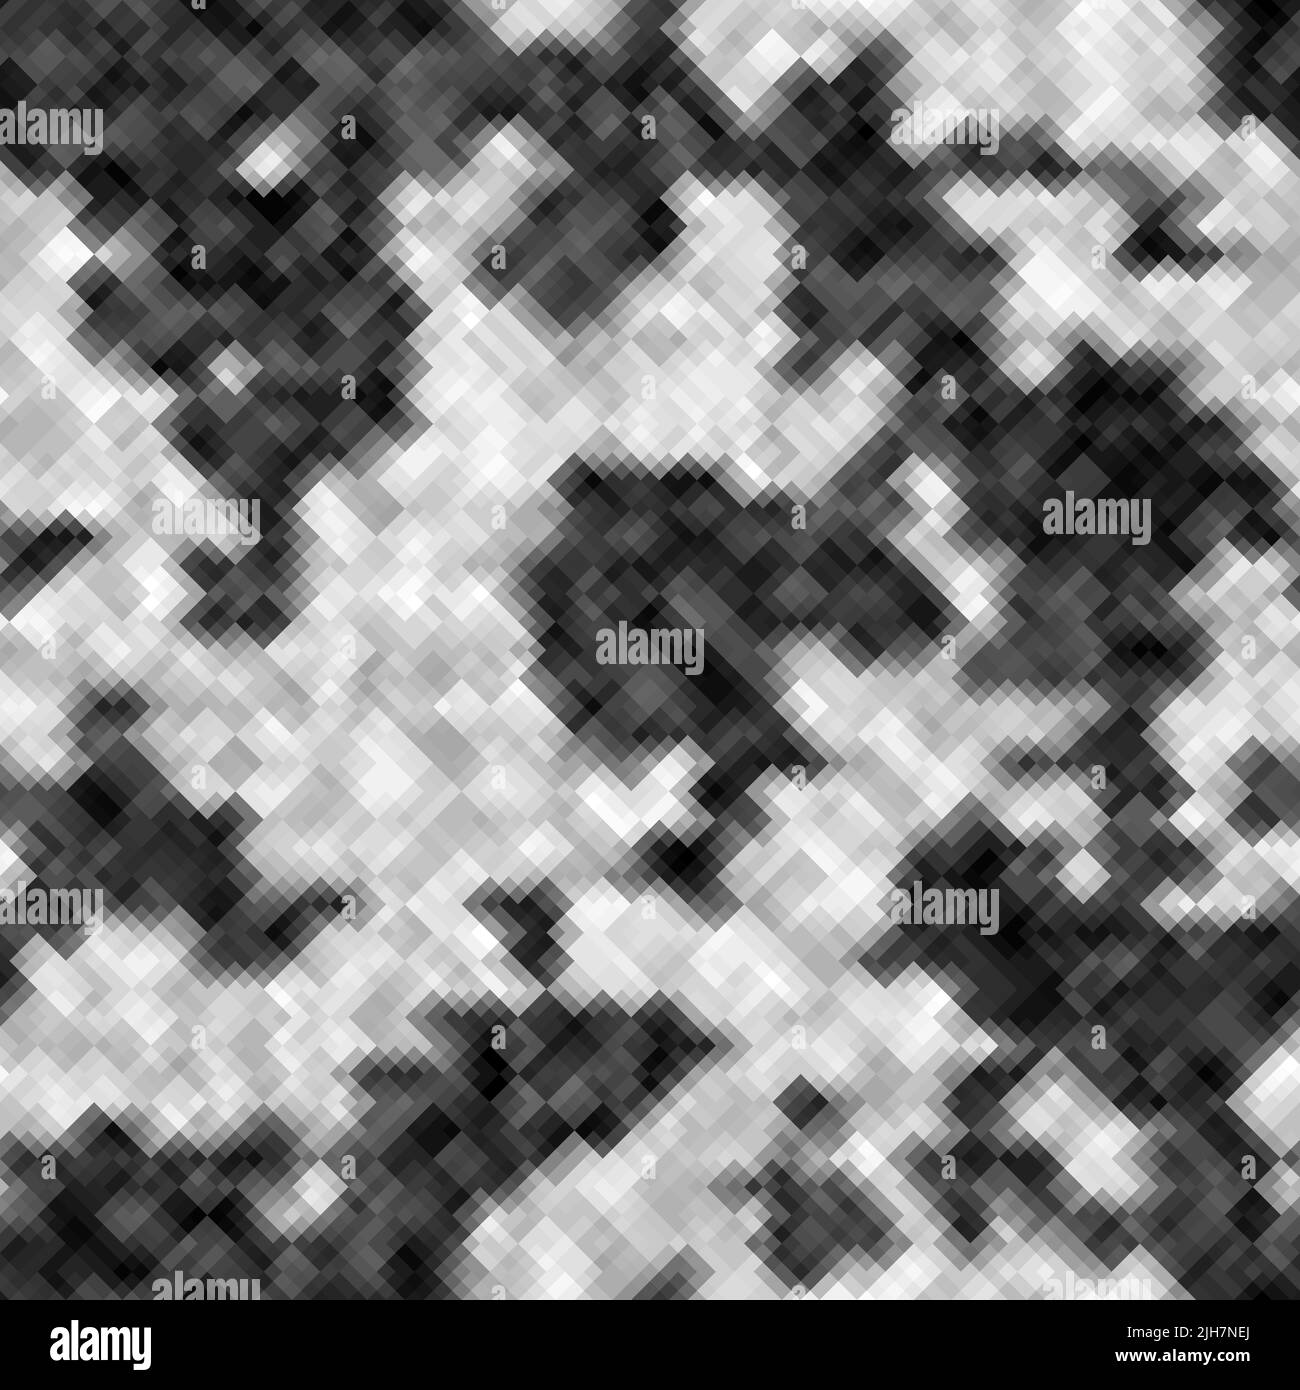 Army camouflage vector seamless pattern Black and White Stock